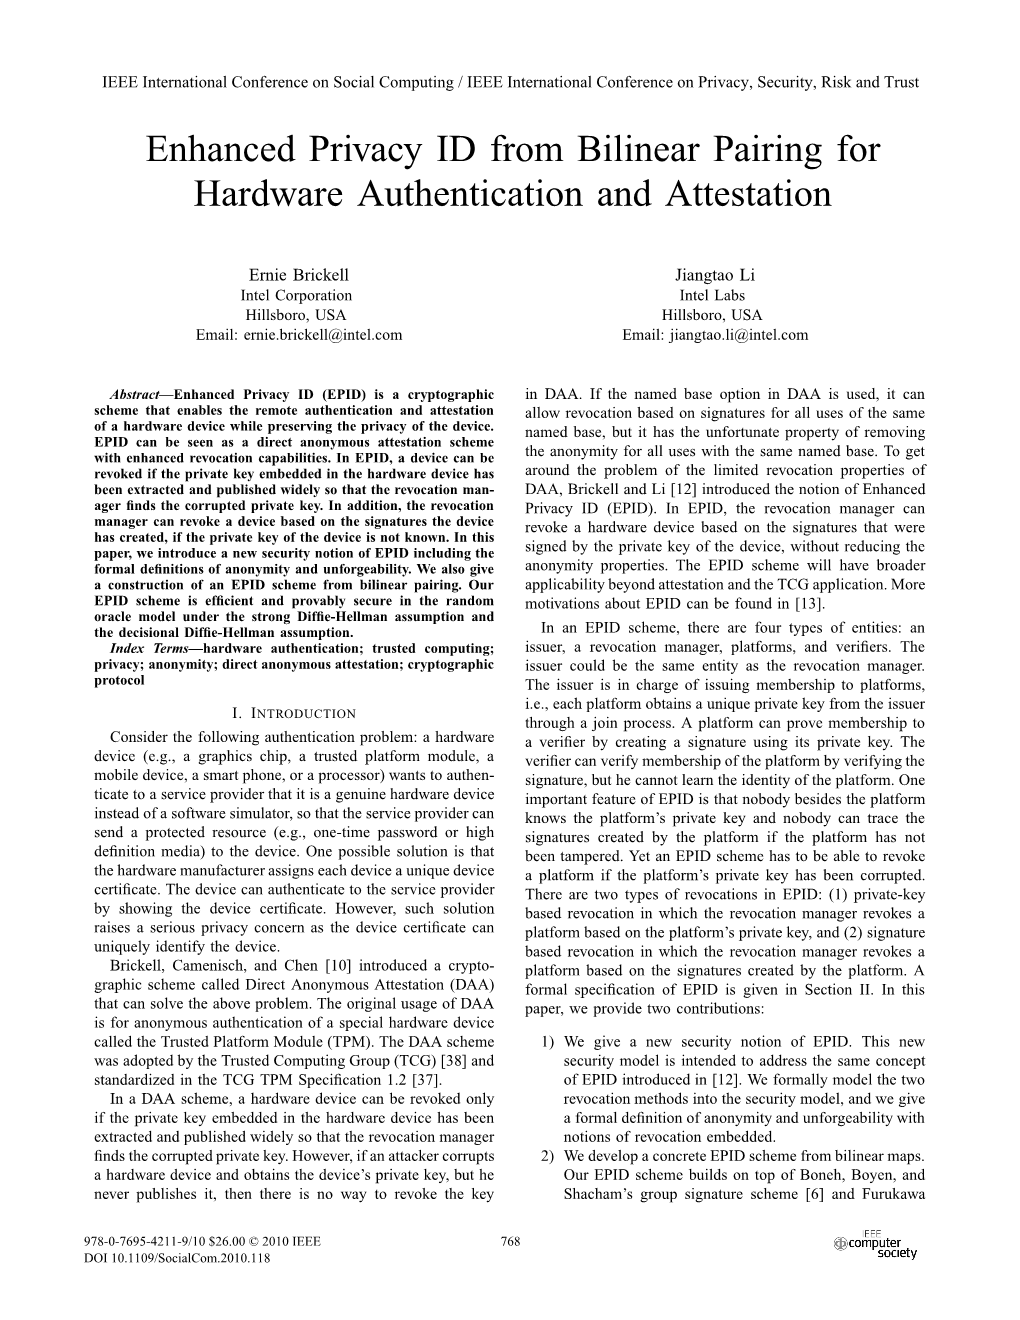 Enhanced Privacy ID from Bilinear Pairing for Hardware Authentication and Attestation